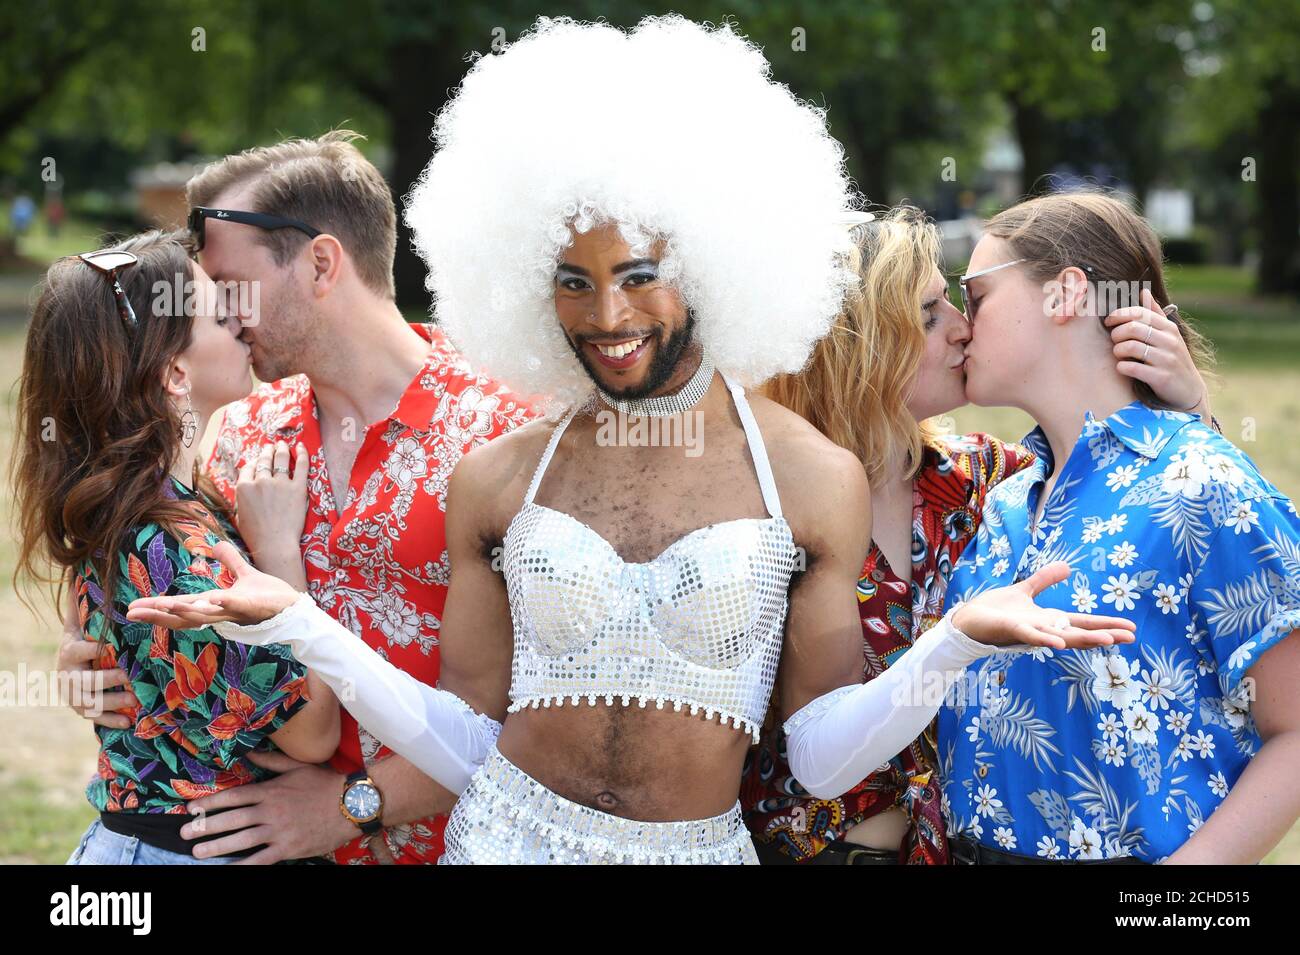 Embargoed to 0001 Friday June 22 EDITORIAL USE ONLY Mercutio, played by Michael Duke, from the upcoming Secret Cinema presents William Shakespeare's Romeo + Juliet, is joined by couples representing the Hawaiian shirt clad Montagues and Capulets to celebrate National Kissing Day and announce an additional 15,000 tickets going on sale, in London. Stock Photo